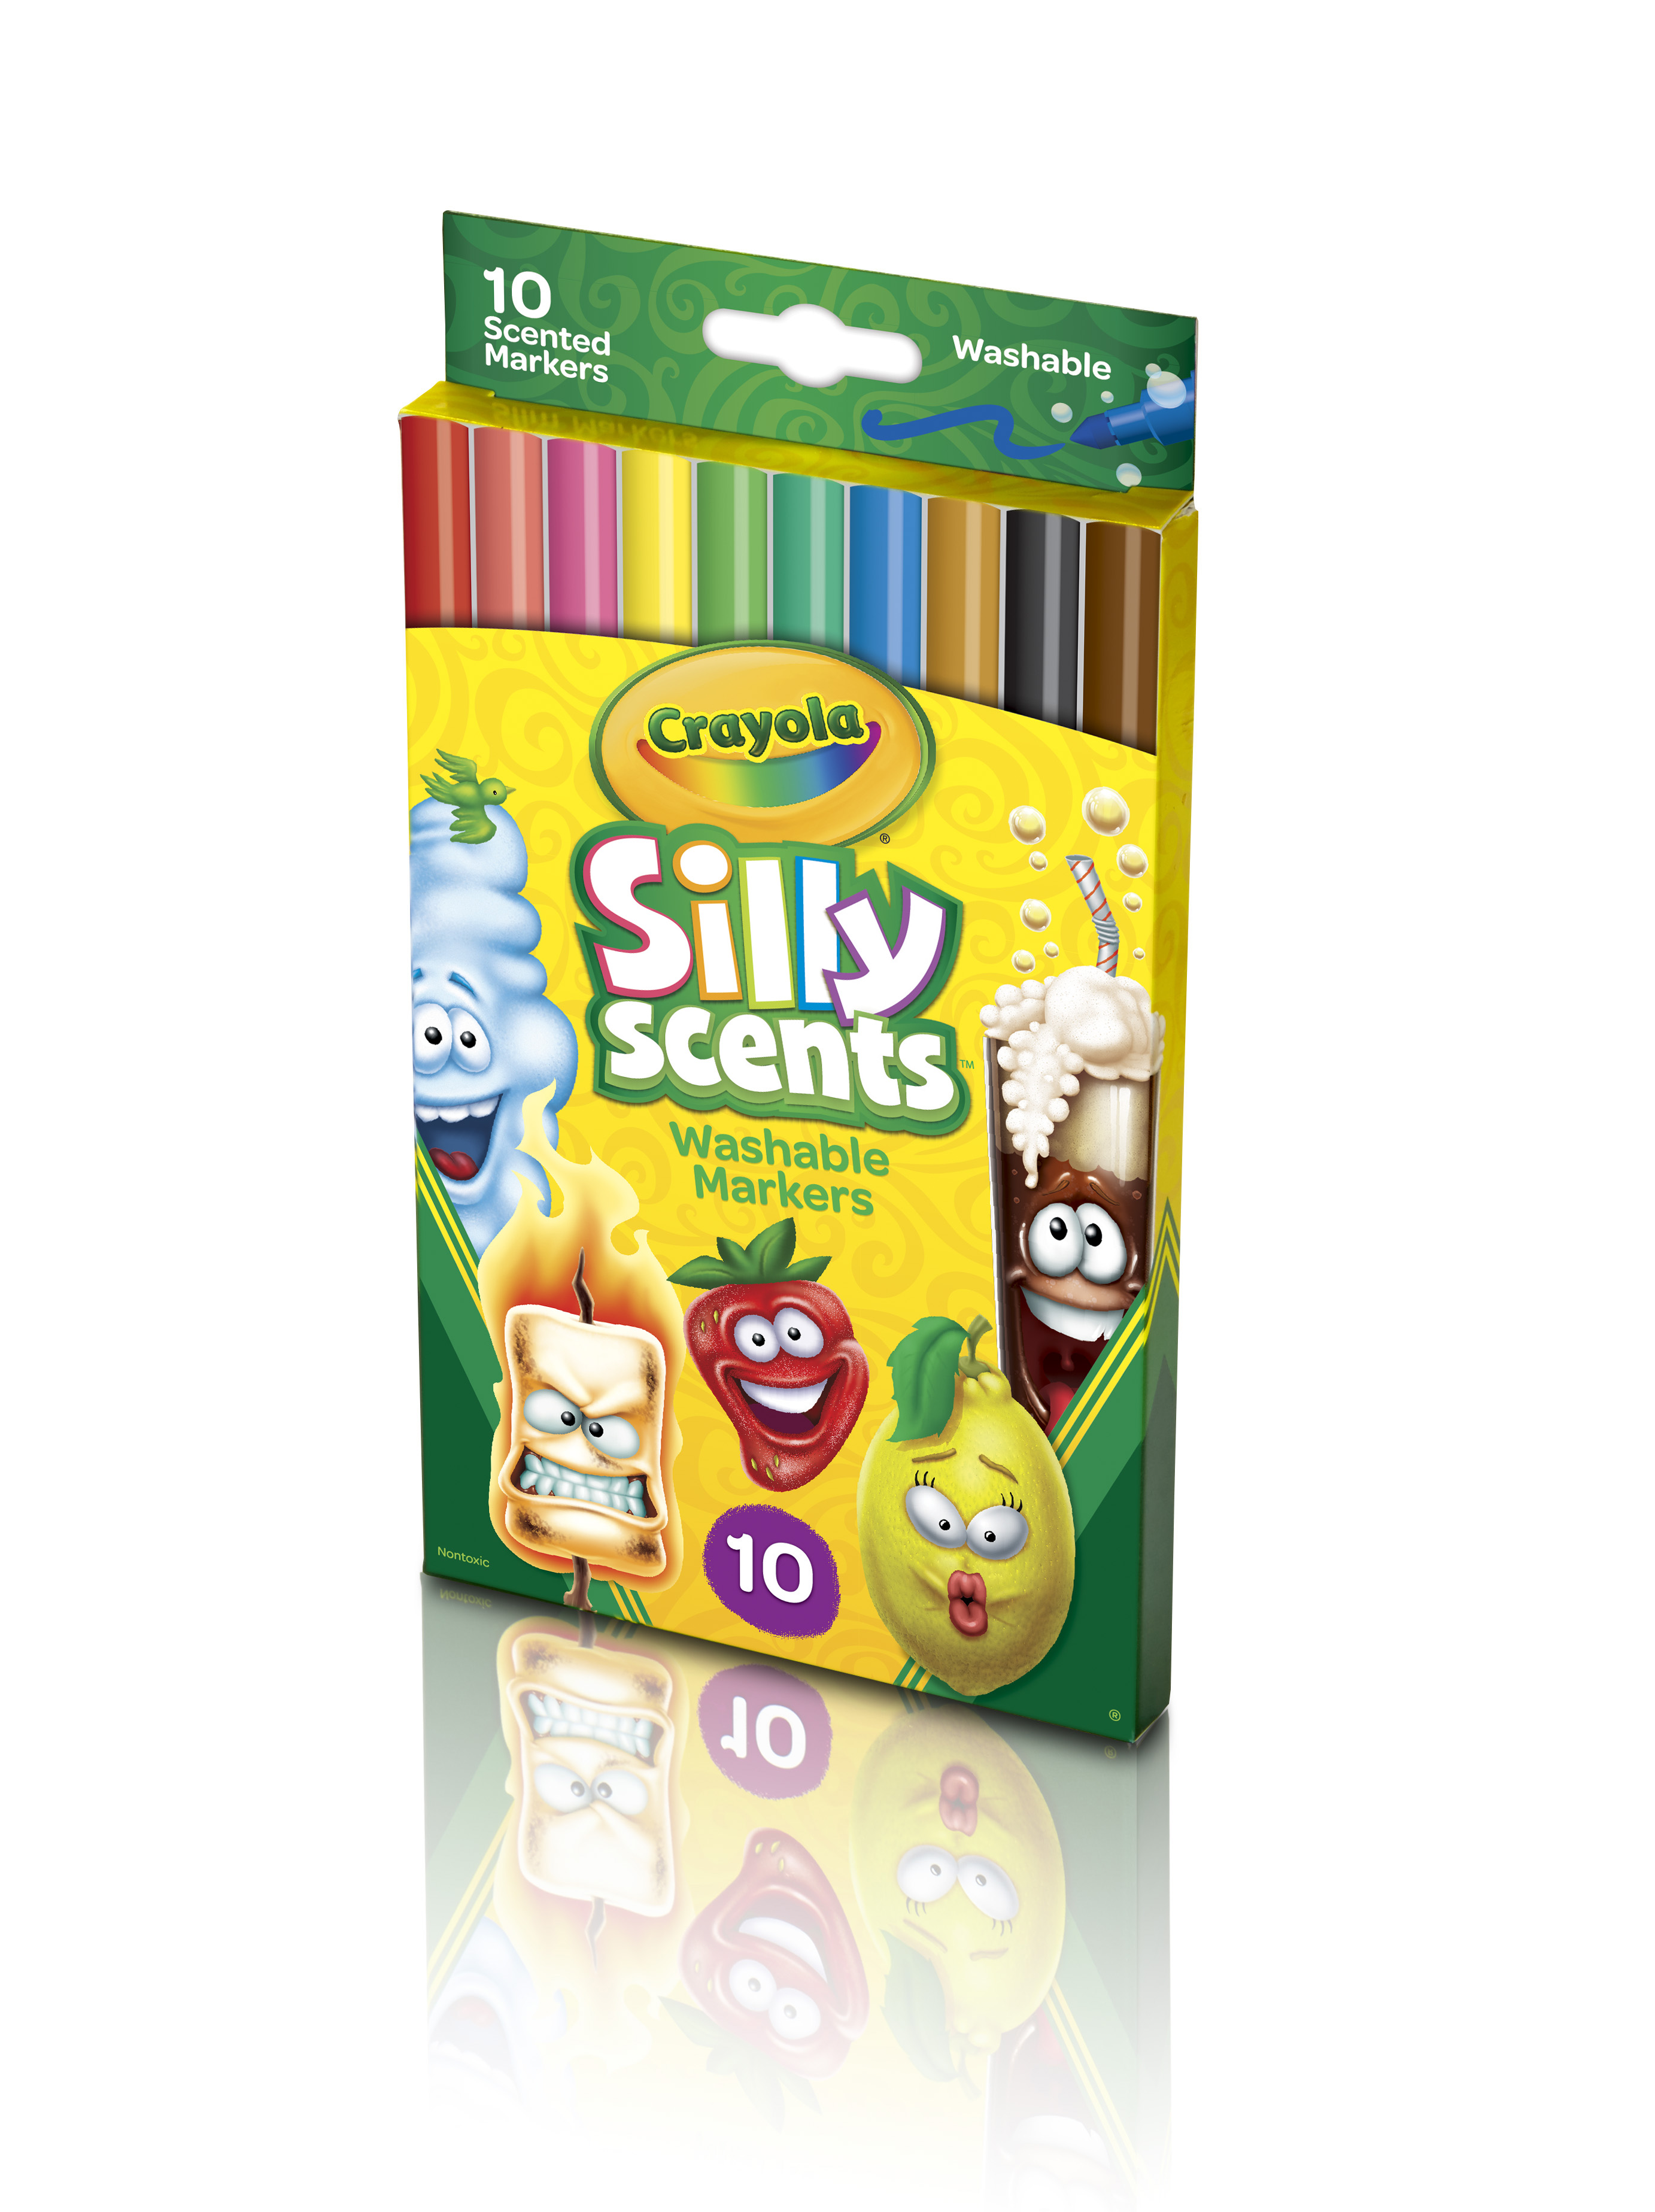 Crayola Silly Scents Slim Markers, Washable Scented Markers For Kids, 10 Pieces - image 5 of 8